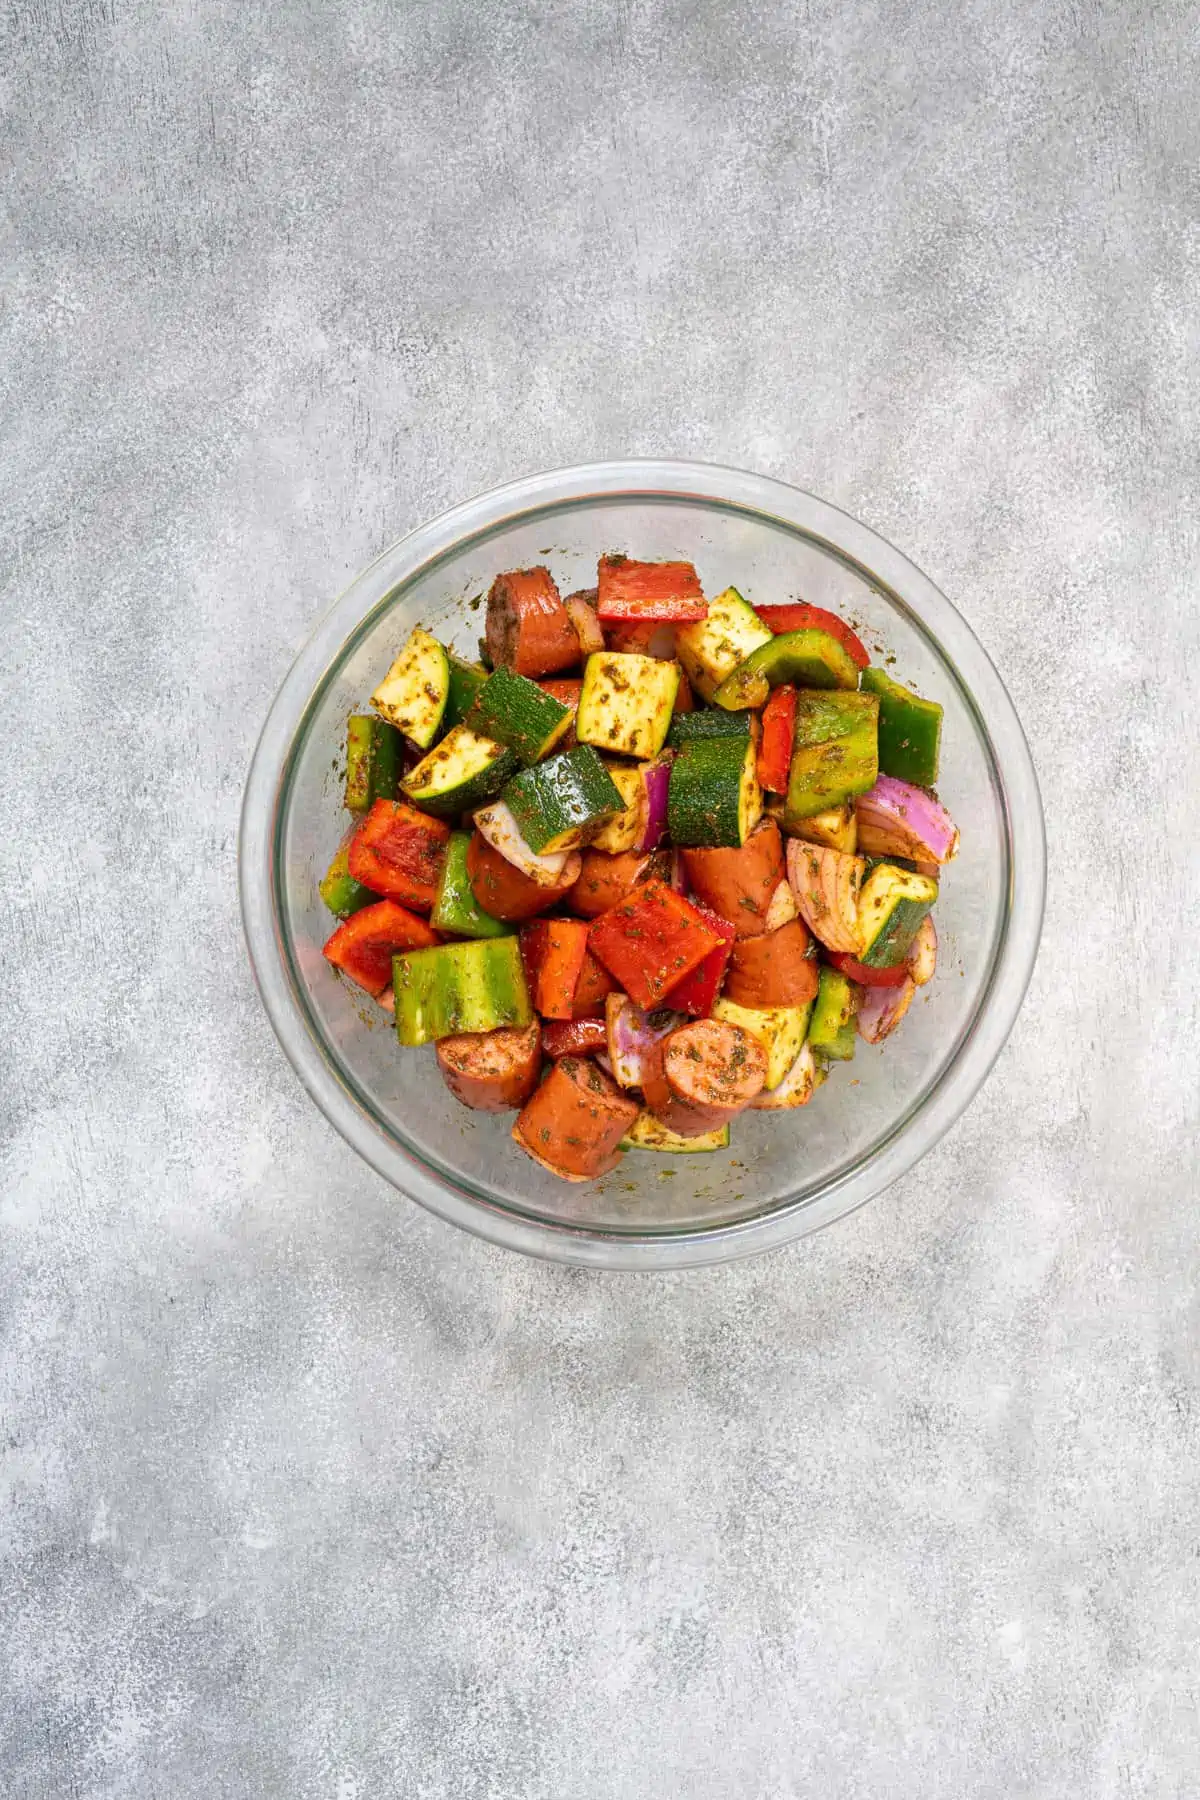 Cut sausage, vegetables, olive oil, and seasoning in a large bowl.